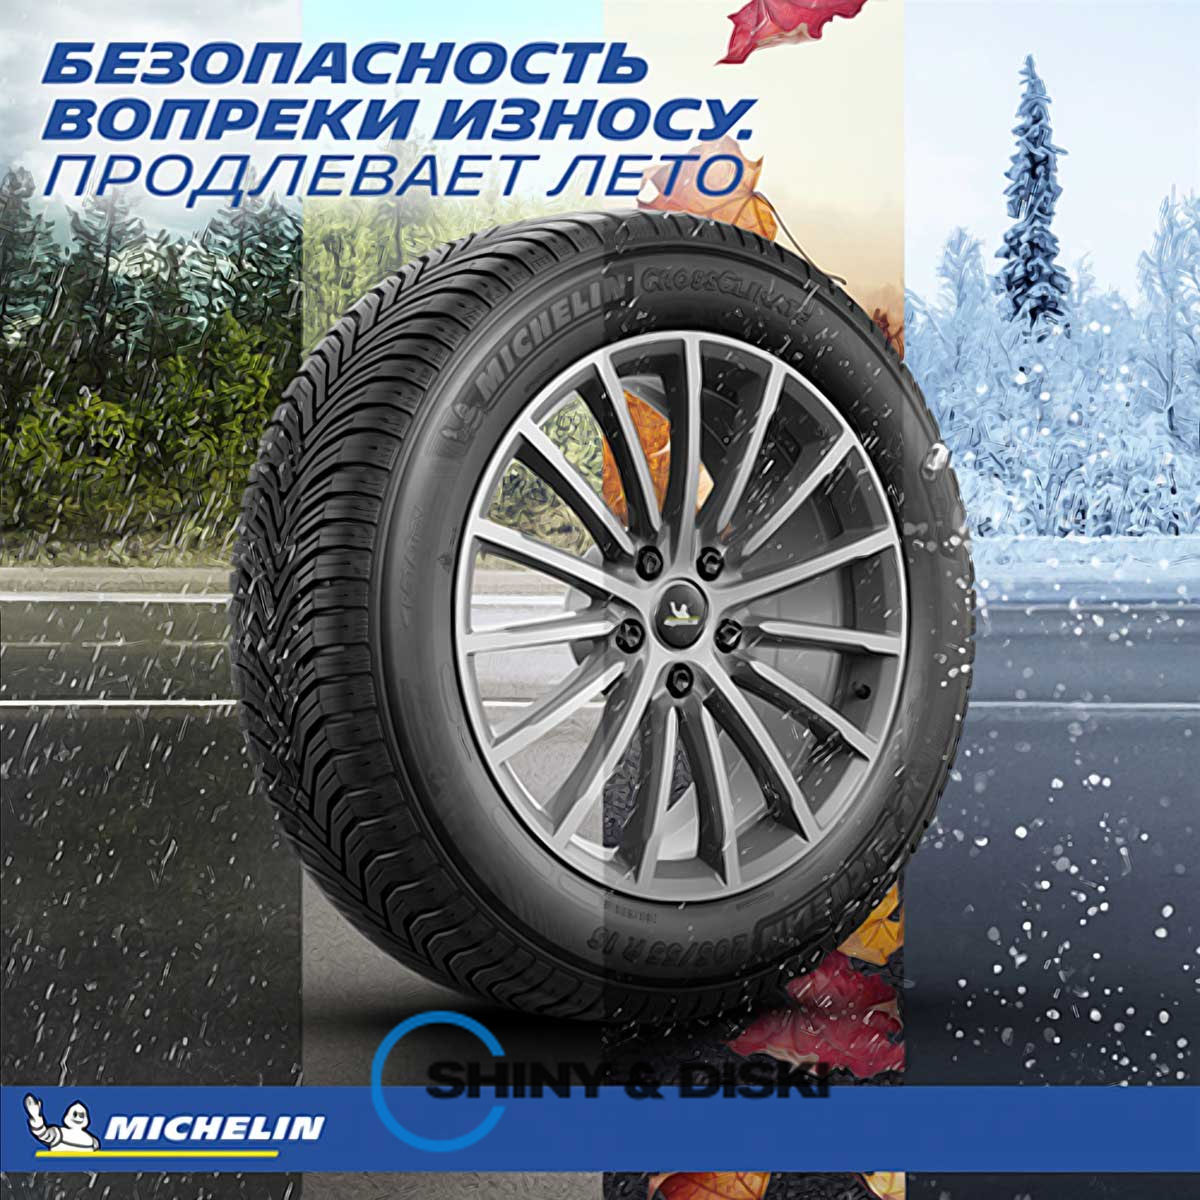 покрышки michelin cross climate+